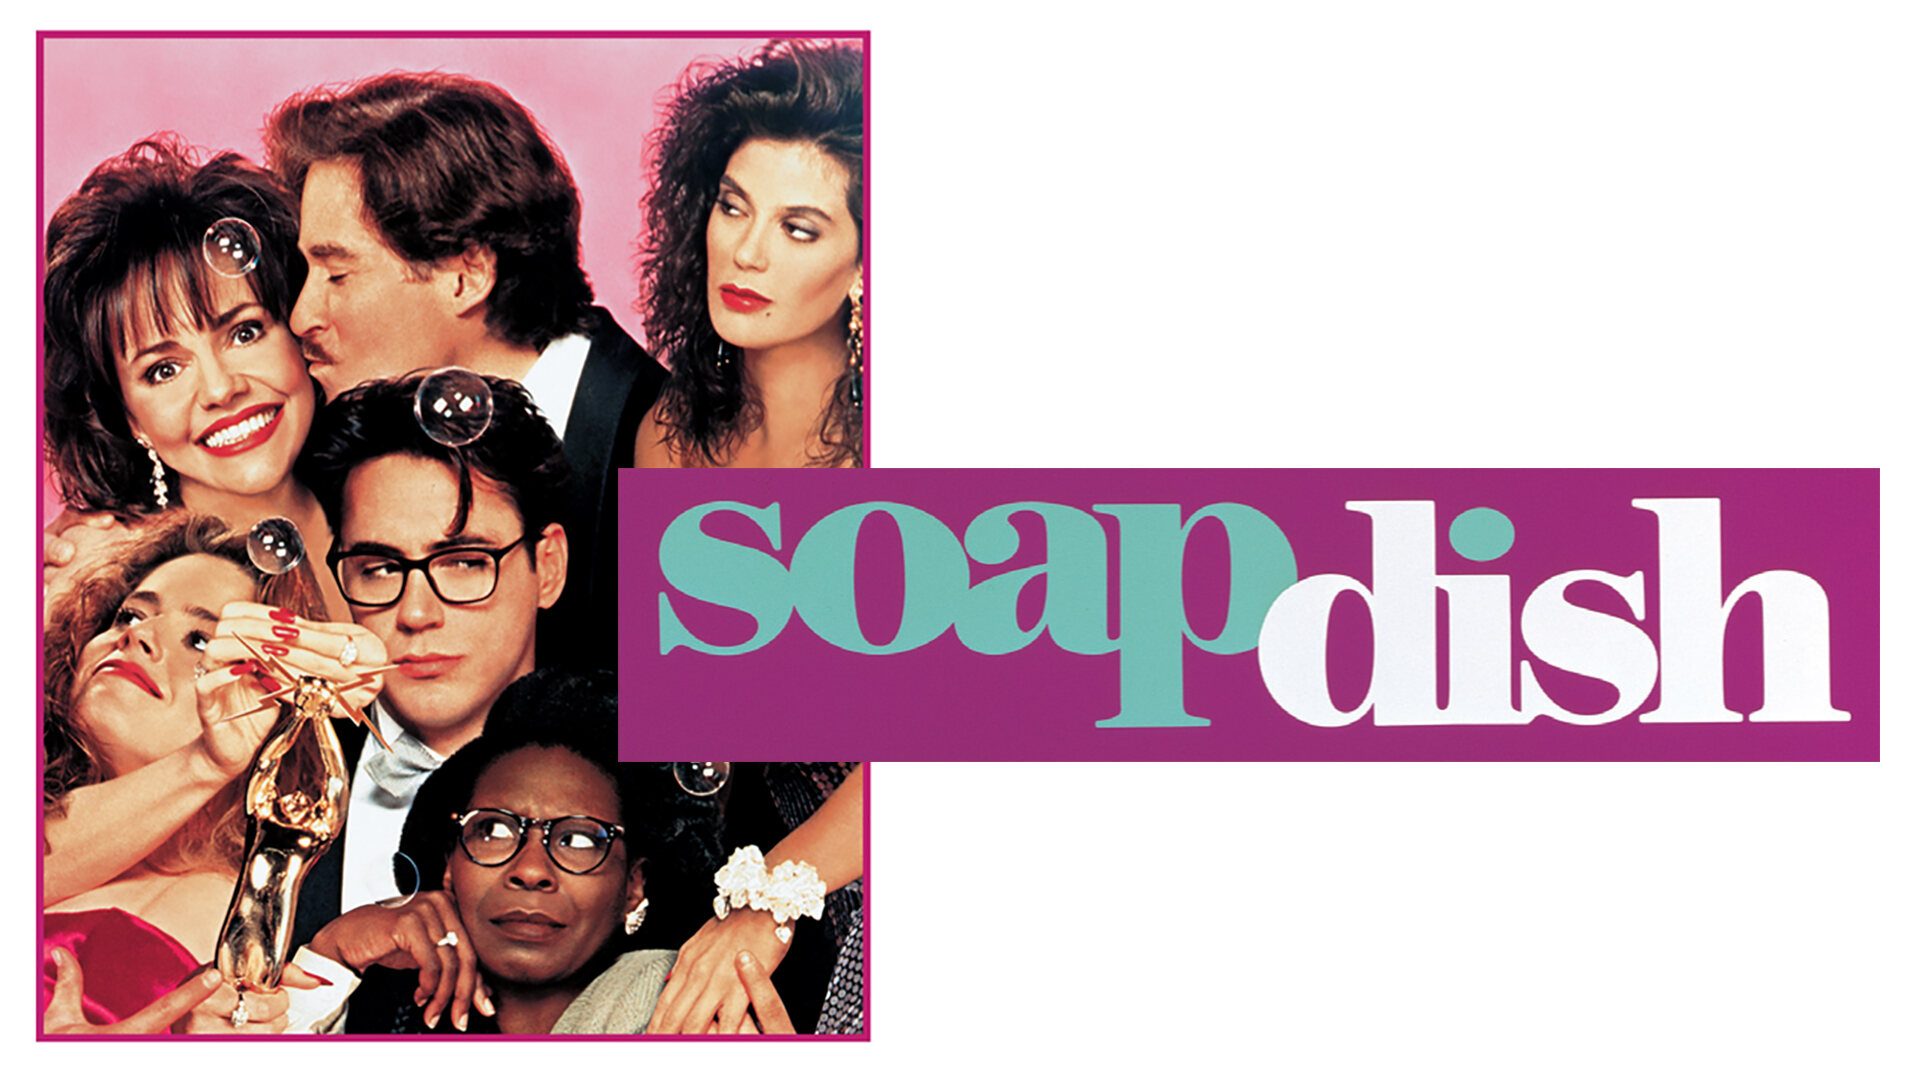 44-facts-about-the-movie-soapdish